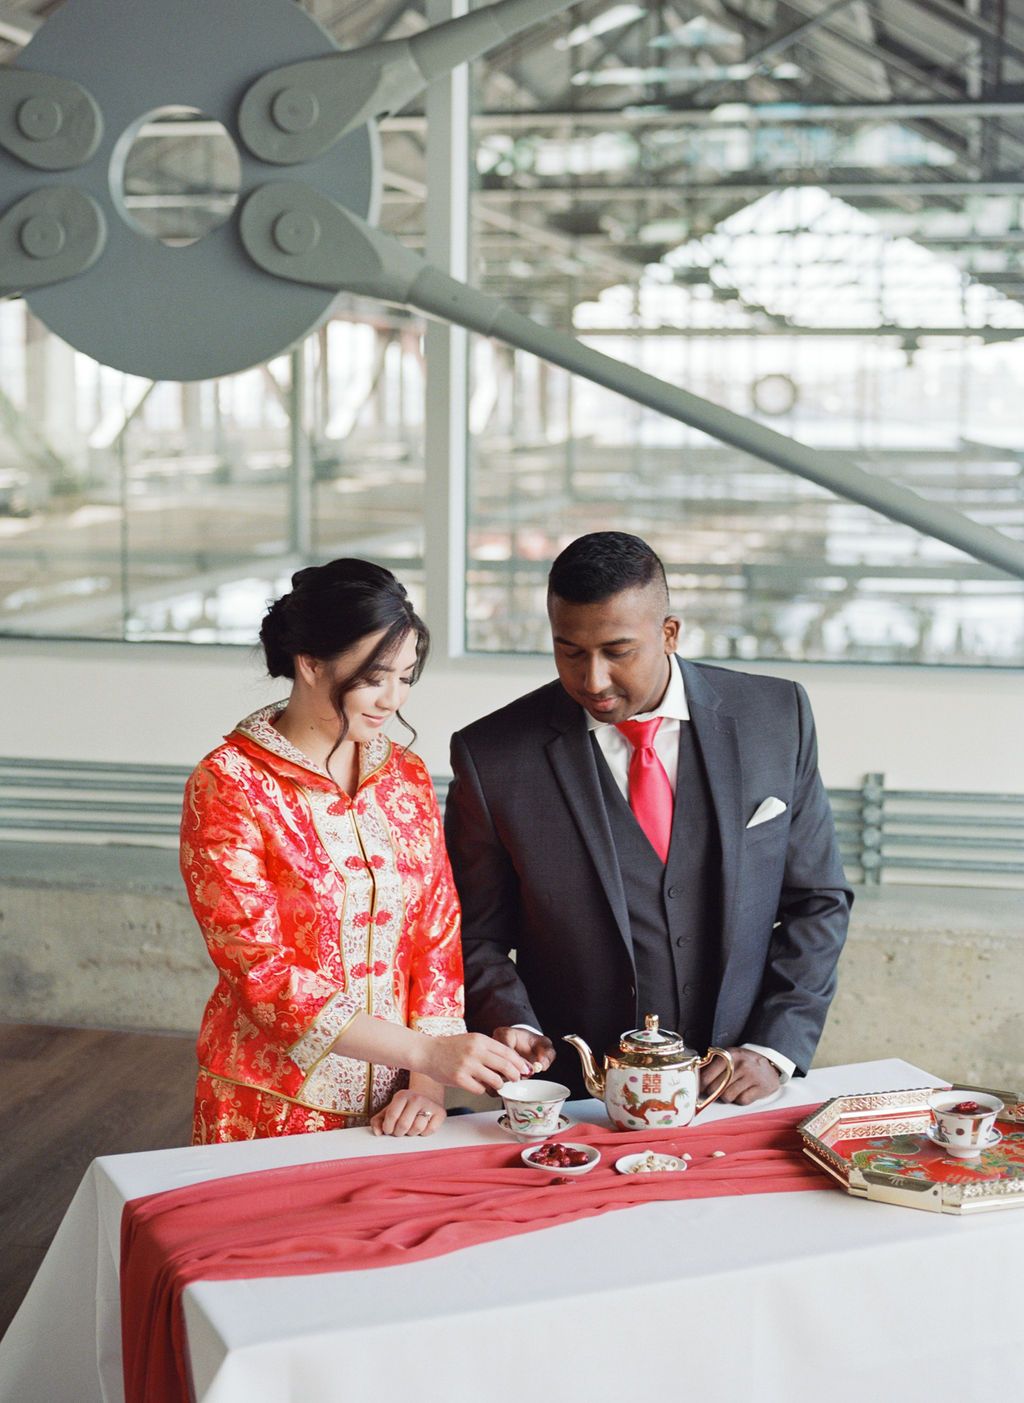 Multicultural wedding inspiration in Vancouver, couple shares intimate moment during tea ceremony